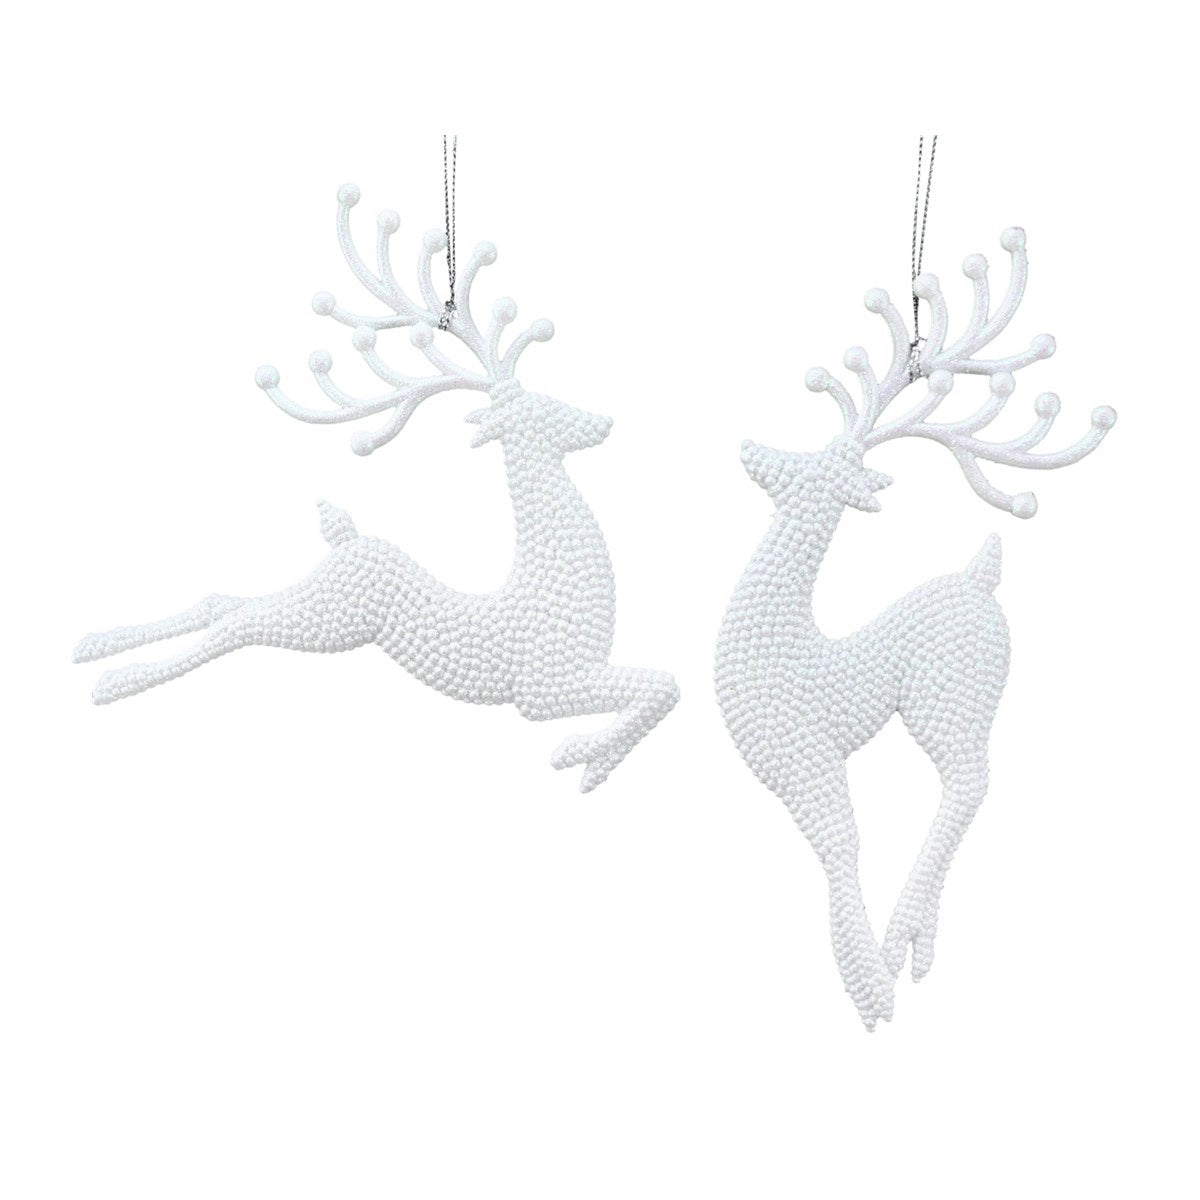 Gisela Graham White Glitter Reindeer Christmas Hanging Decoration - Jumping  Browse our beautiful range of luxury Christmas tree decorations and ornaments for your tree this Christmas.  Add style to your Christmas tree with this elegant white glitter reindeer hanging ornament.